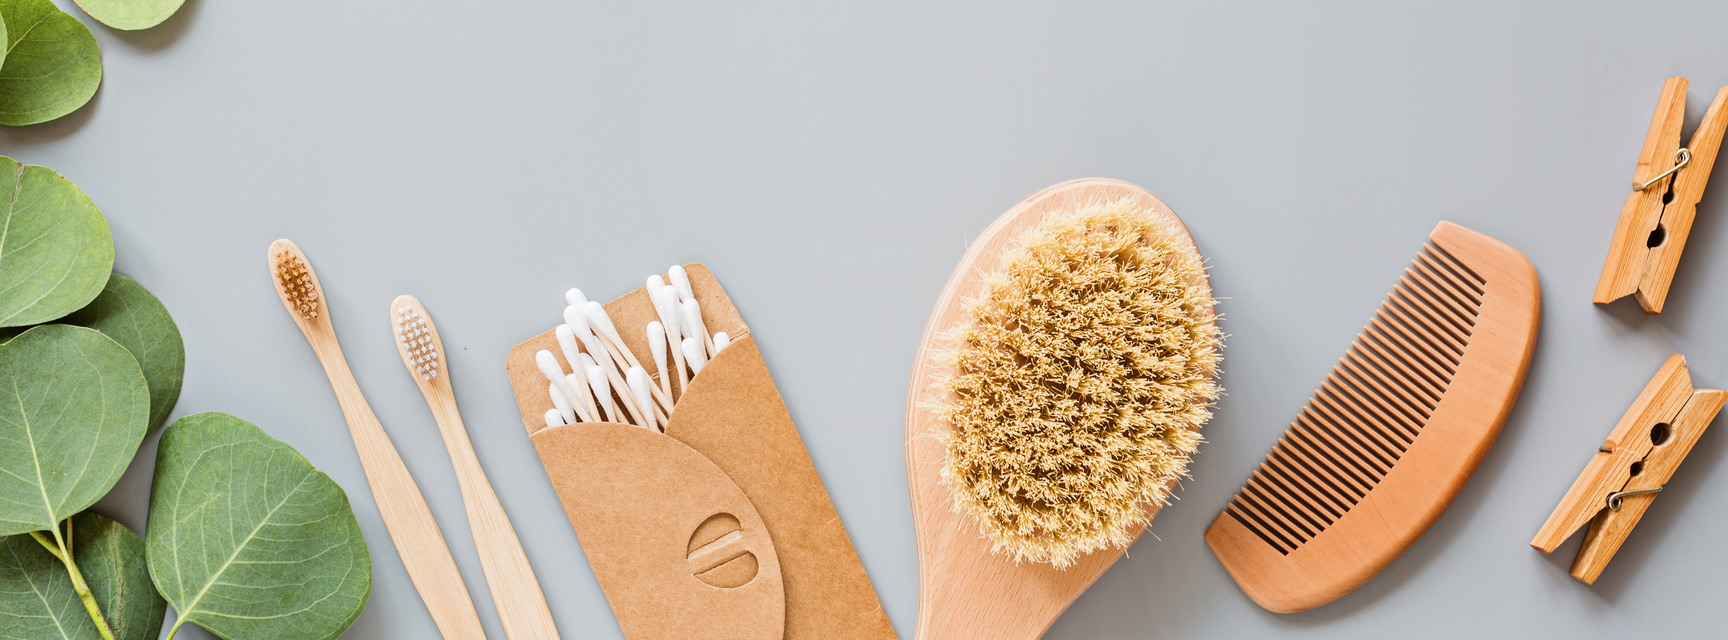 Composition of Wooden Comb, Brush, Toothbrush and Cotton Buds Flatlay